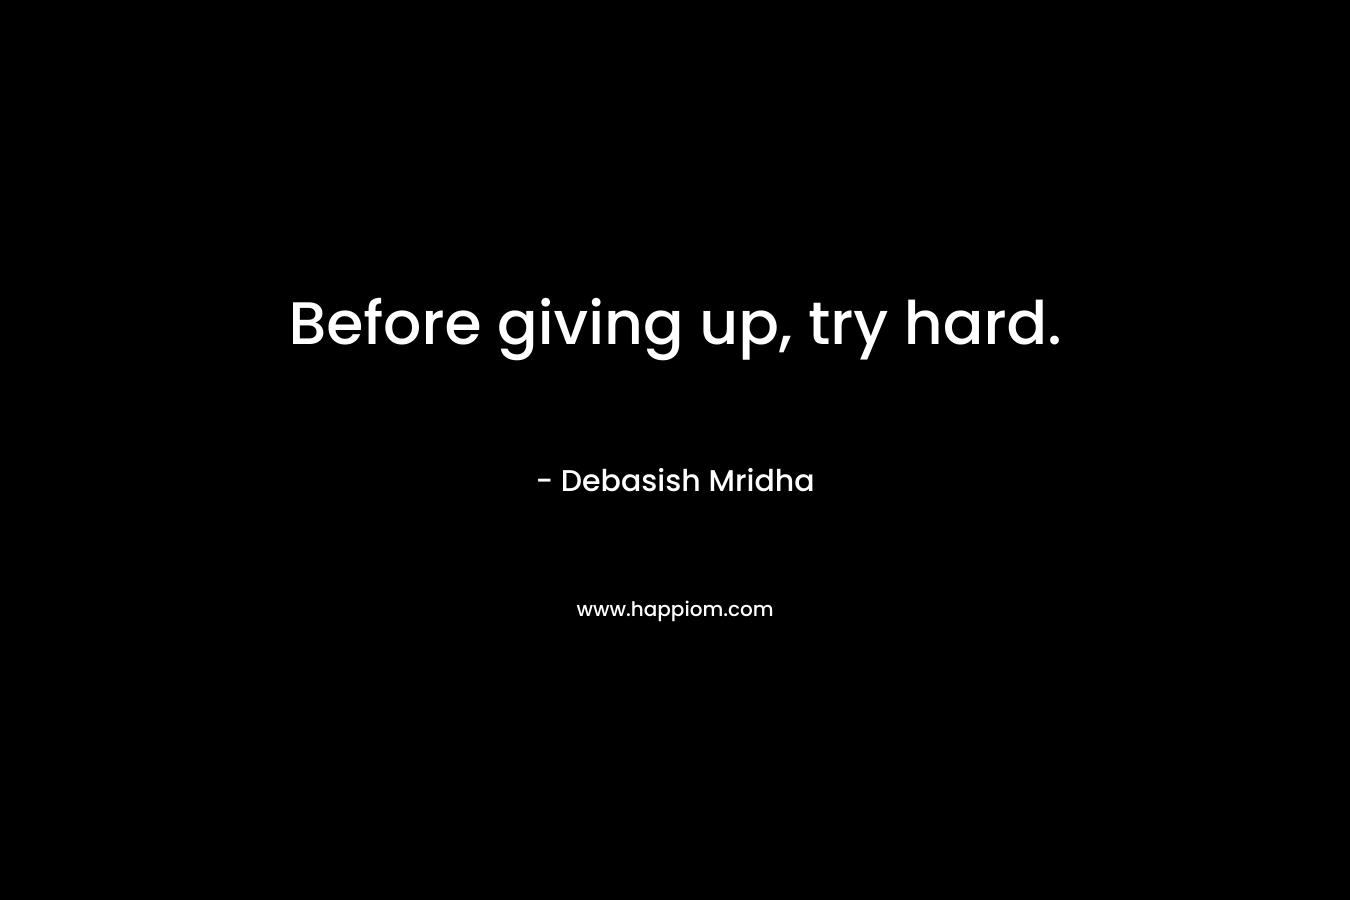 Before giving up, try hard.